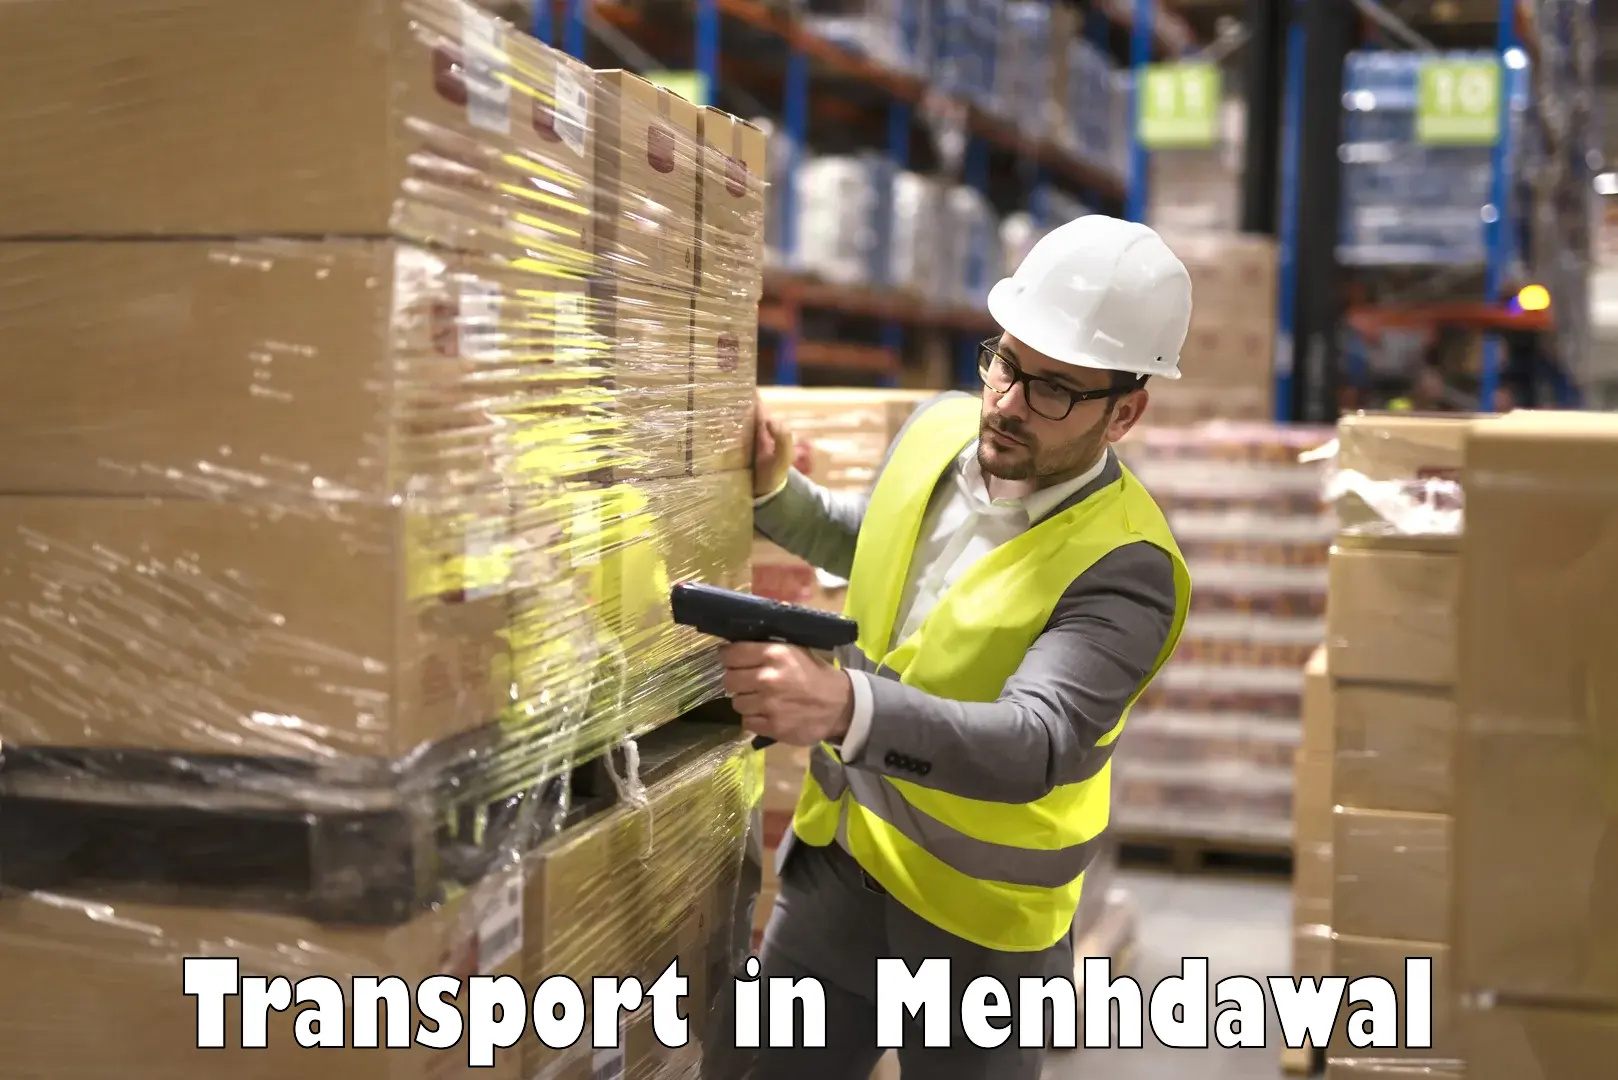 Inland transportation services in Menhdawal